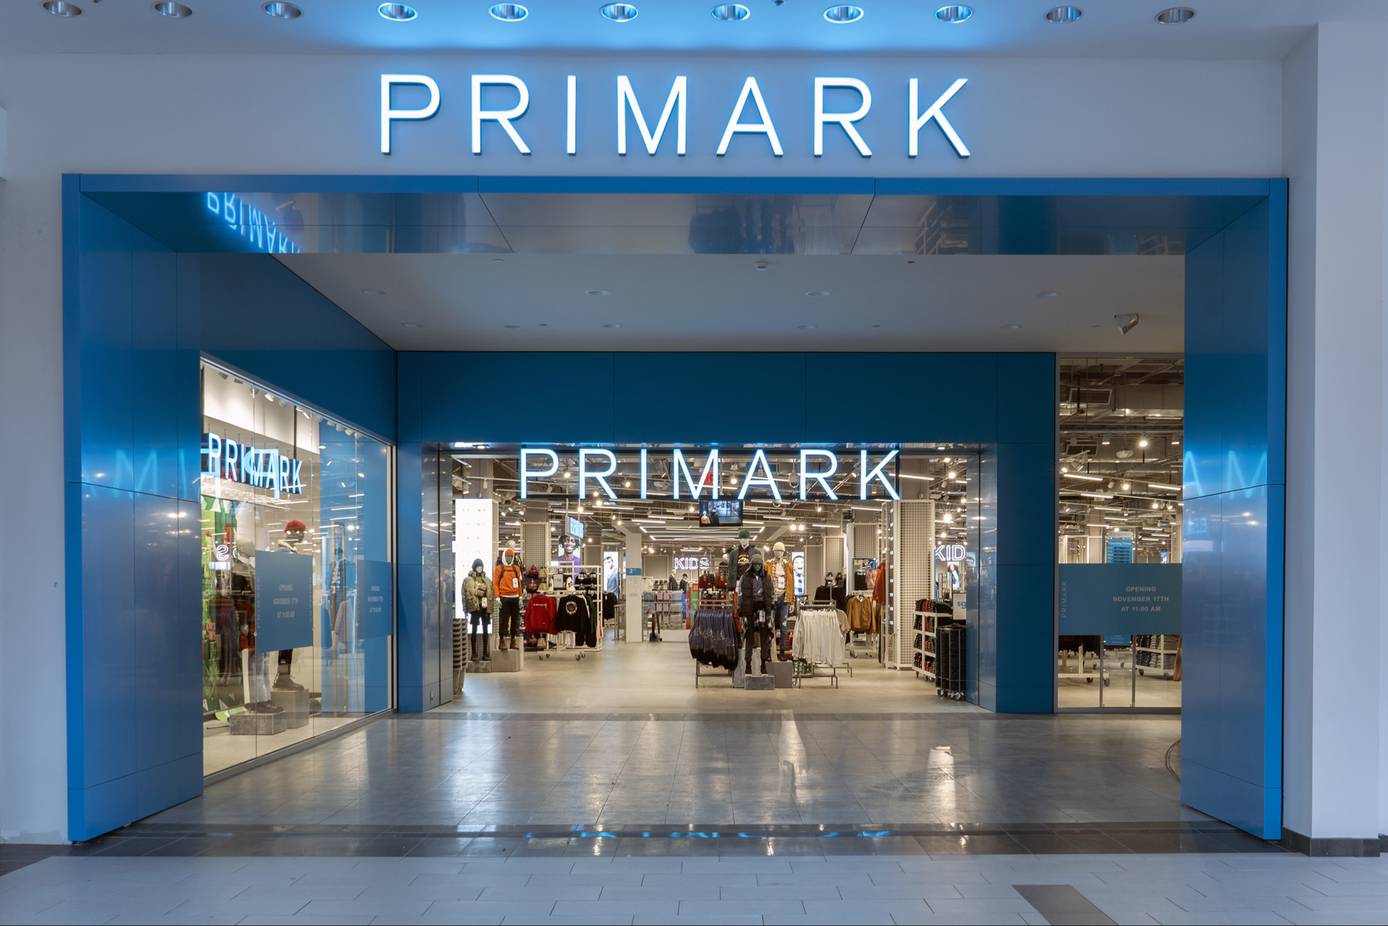 Primark continues US rollout in New York and North Carolina